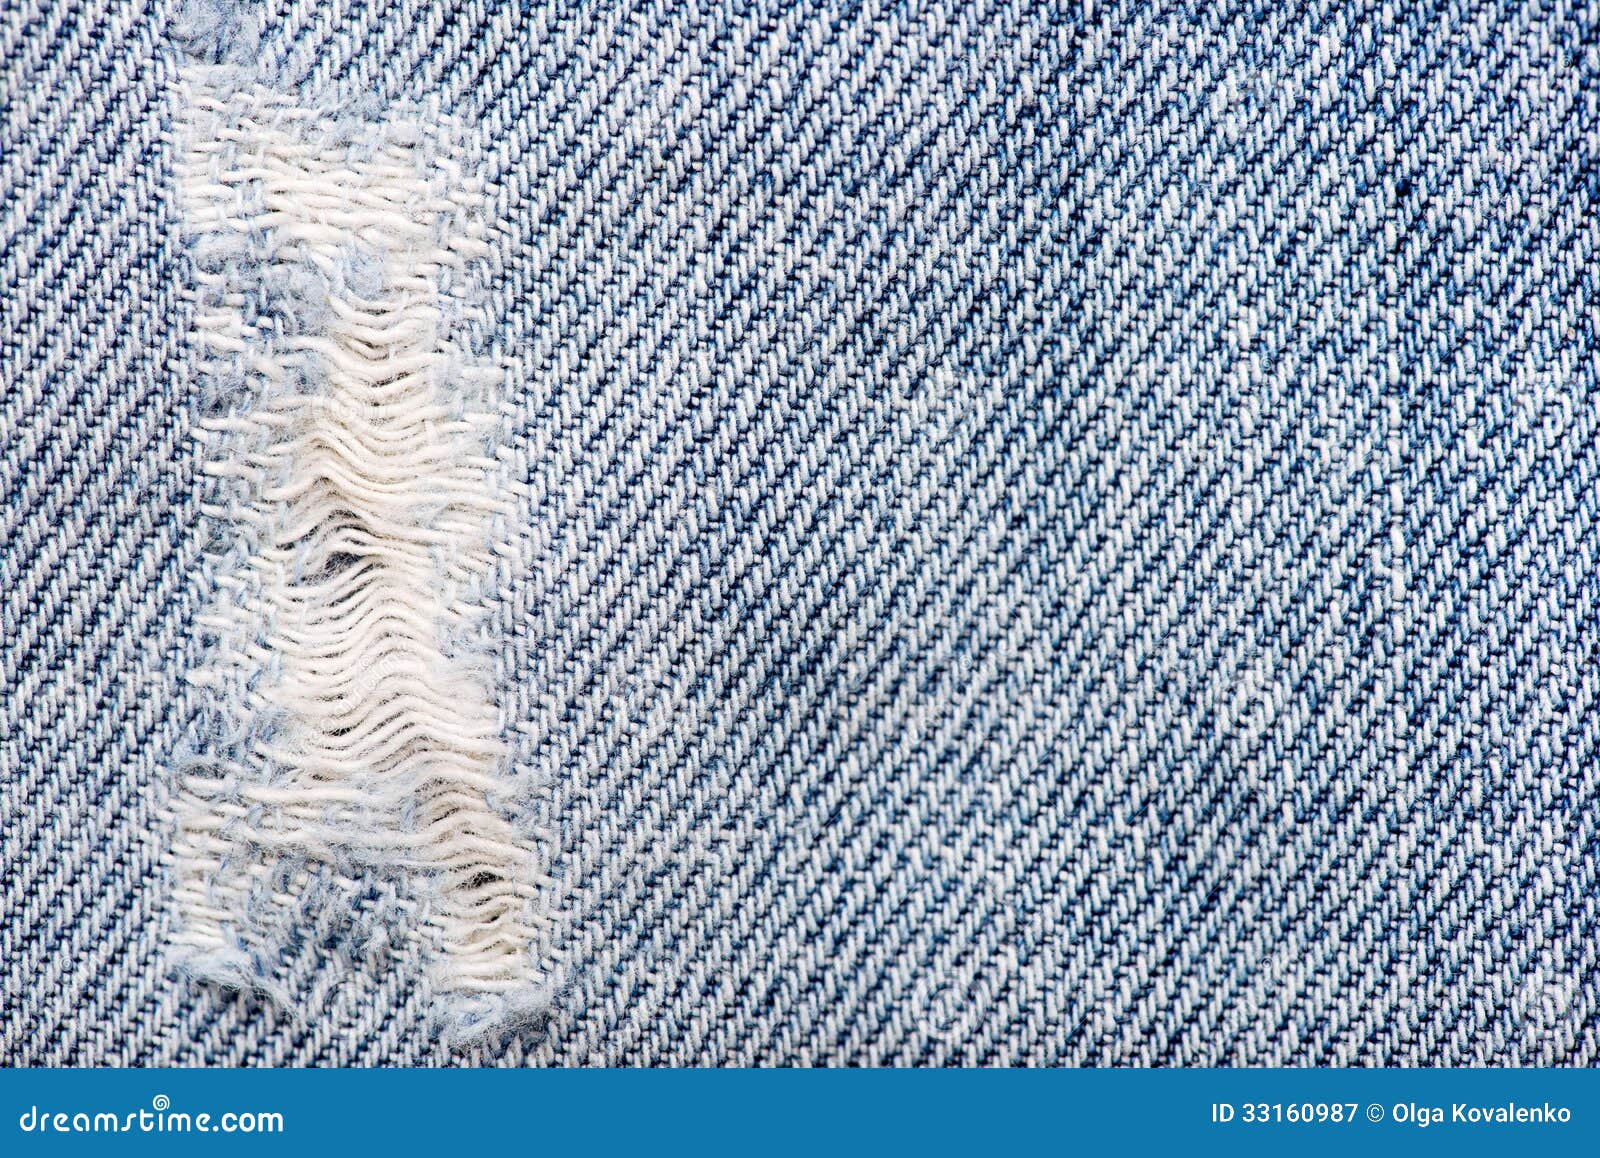 Blue Jeans Torn Fabric Royalty Free Stock Photography - Image: 33160987